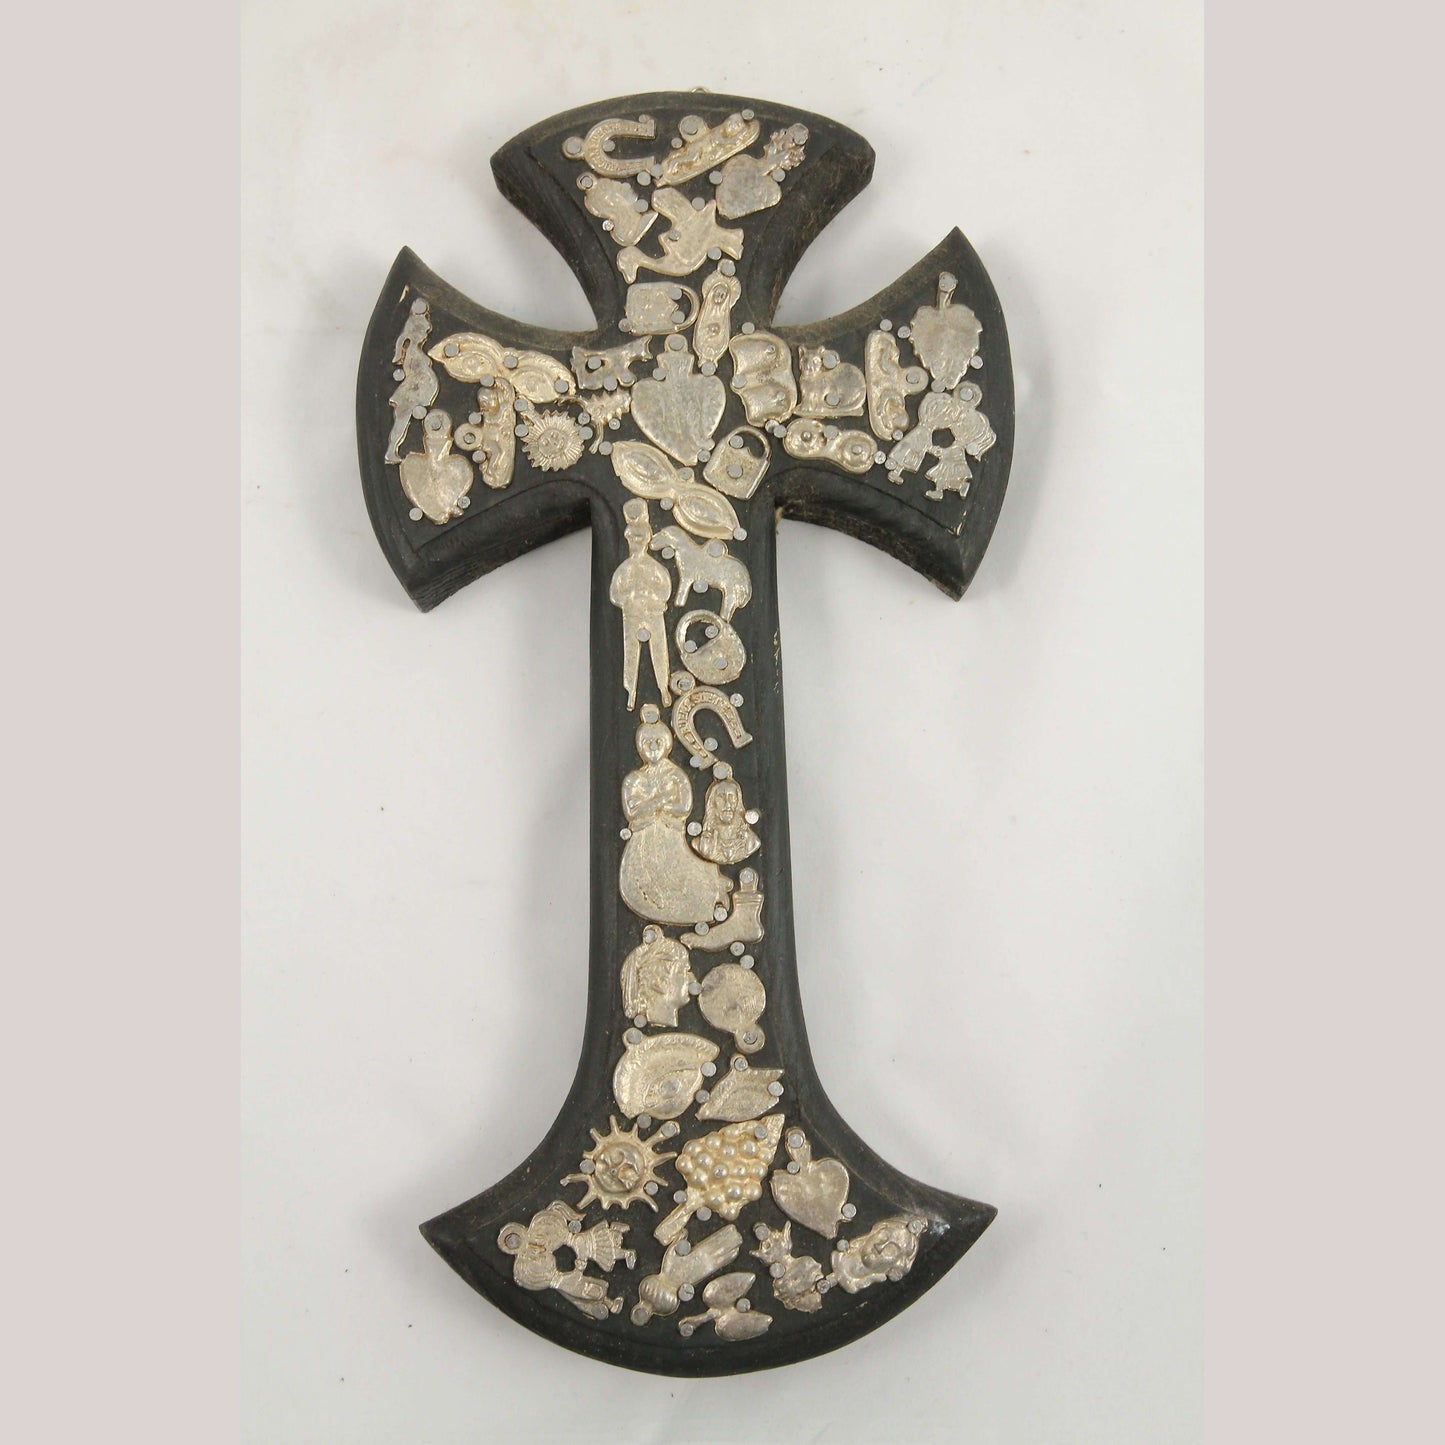 Lg Wood Hanging Cross/Milagros Mexican Folk Art Hand Made/Painted Religion Black